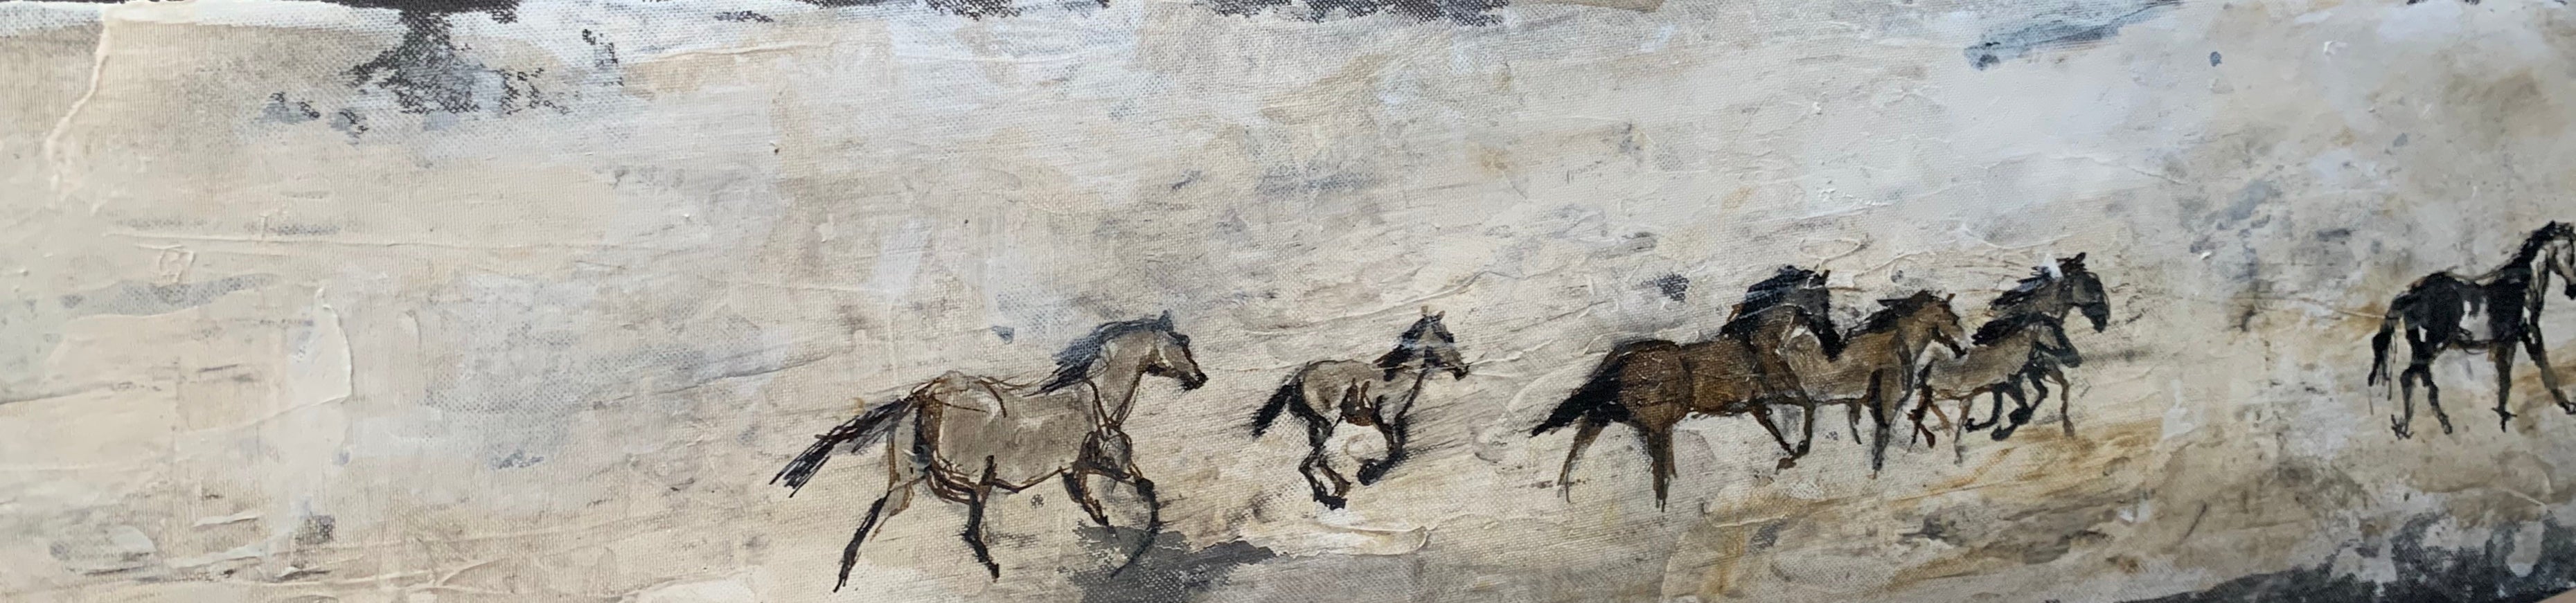 Wild horses galloping in their desert landscape, running away from me once they came aware of my presence in the distance. With their instinct guiding their actions, the herd acts as one. The herd is a strong defender of their space, their habitat, which is sadly under constant threat.